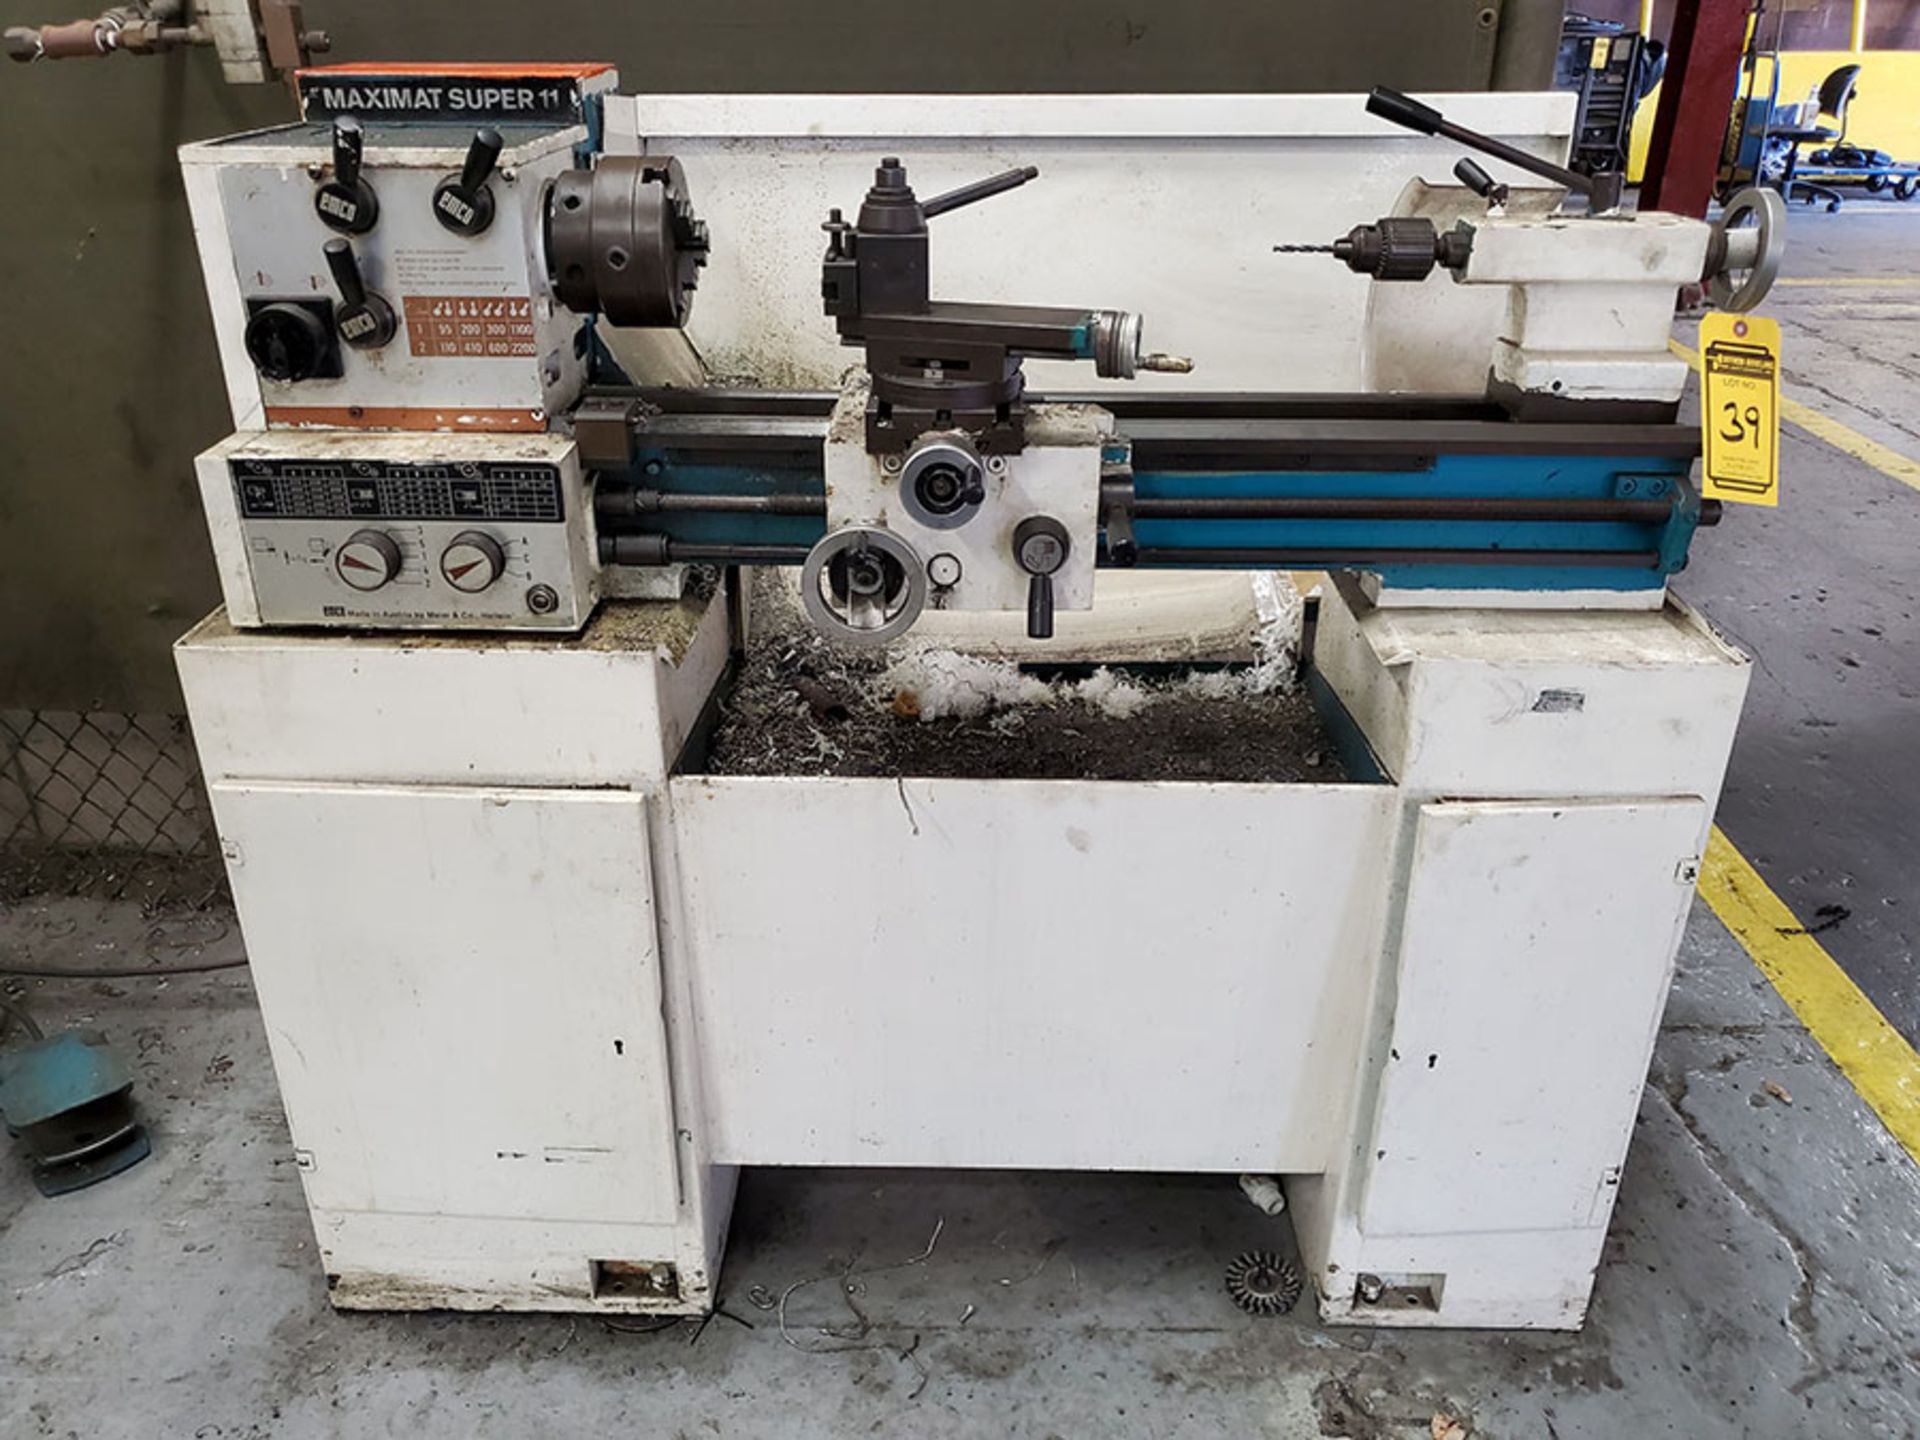 EMCO MAXIMAT SUPER 11 HORIZONTAL ENGINE LATHE, 55-2,200 RPM, 3' BED, 5 1/2’’ 3-JAW CHUCK, TOOL POST,